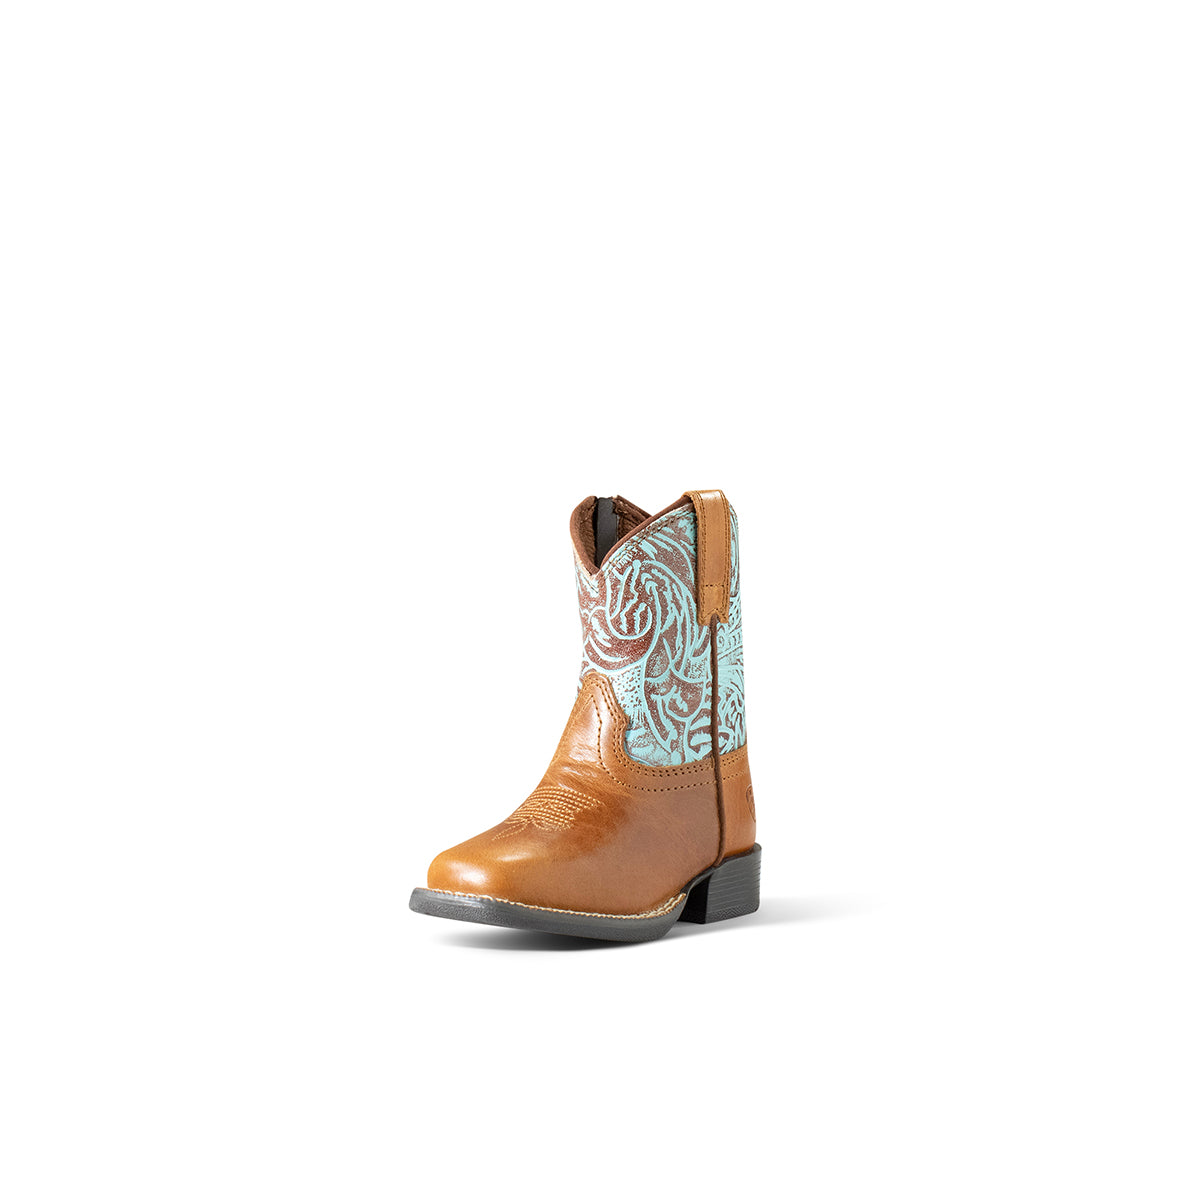 Ariat Toddler's Round Up Style Lil' Stompers Boots - Brown w/Turquoise Design